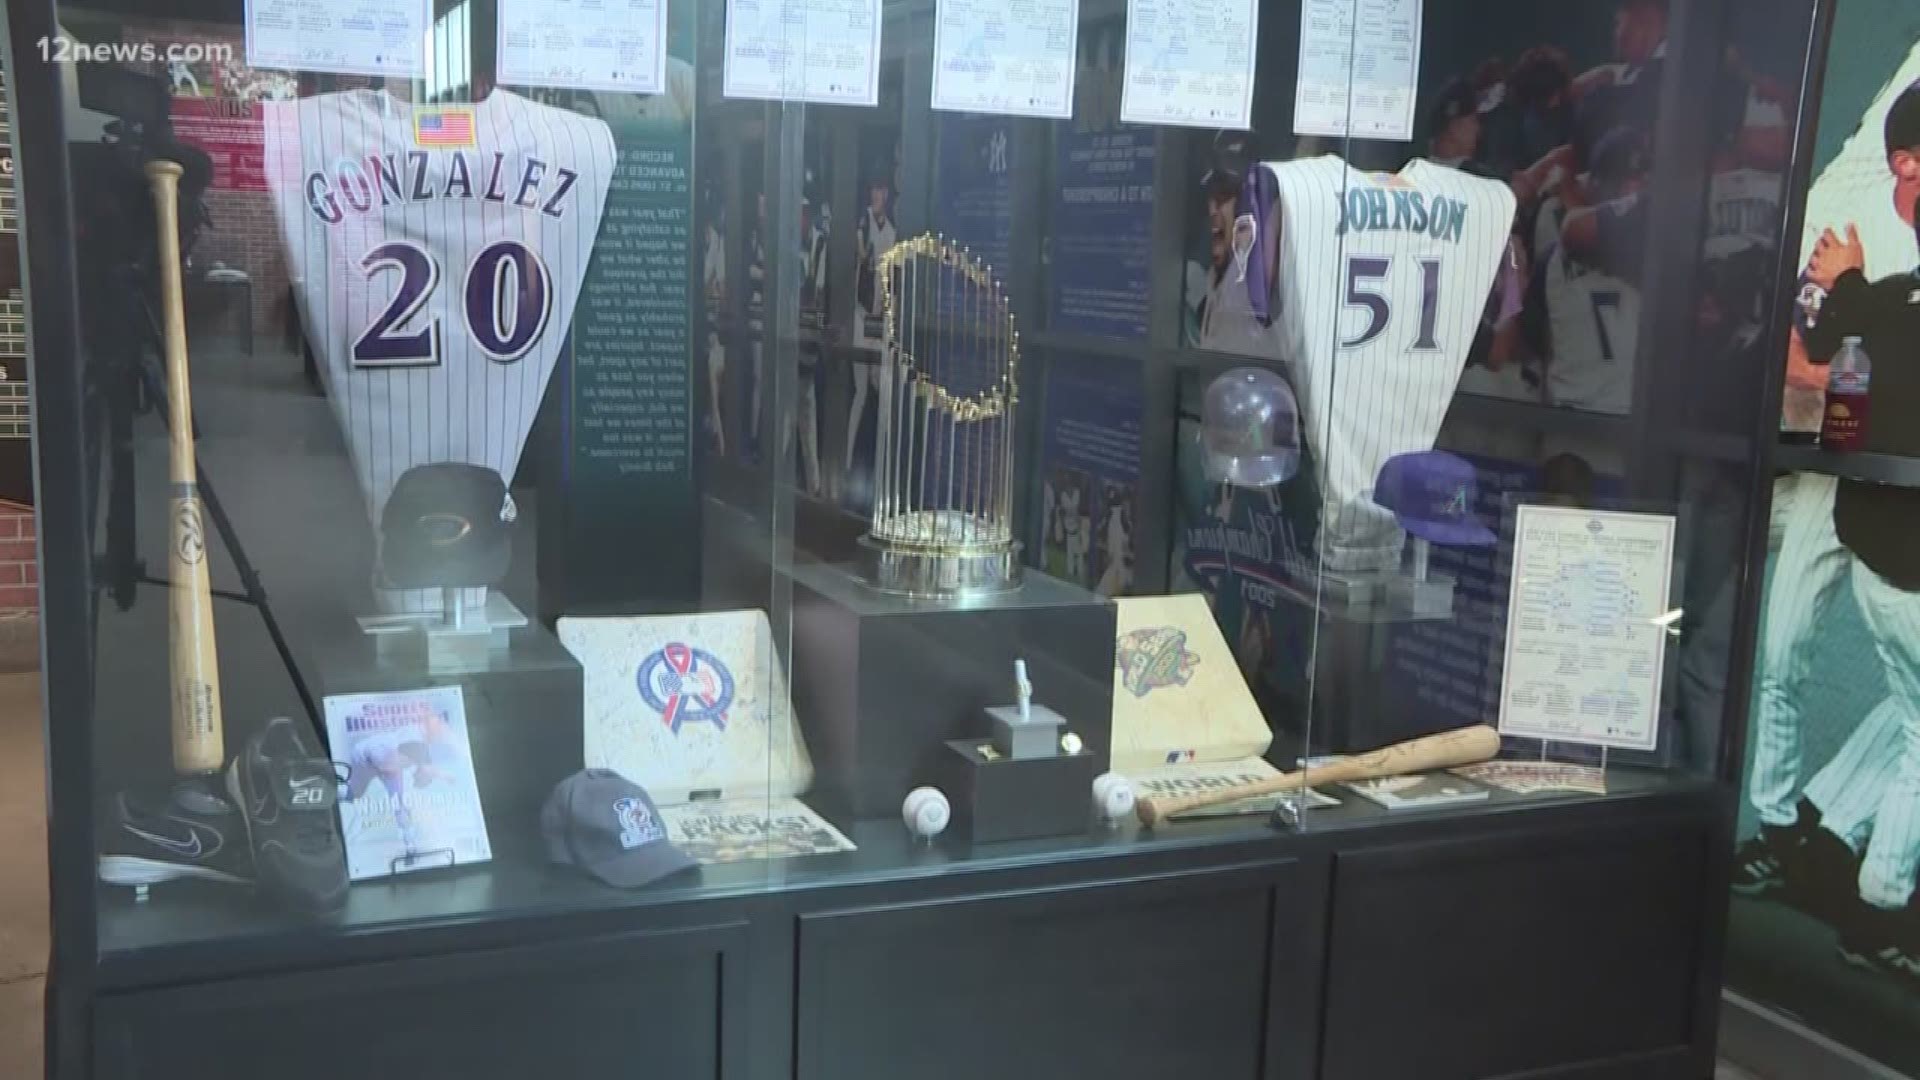 Silver Sluggers, Golden Gloves and the 2001 World Series trophy are all on display at a new museum at Chase Filed that highlights 20 years of franchise history.